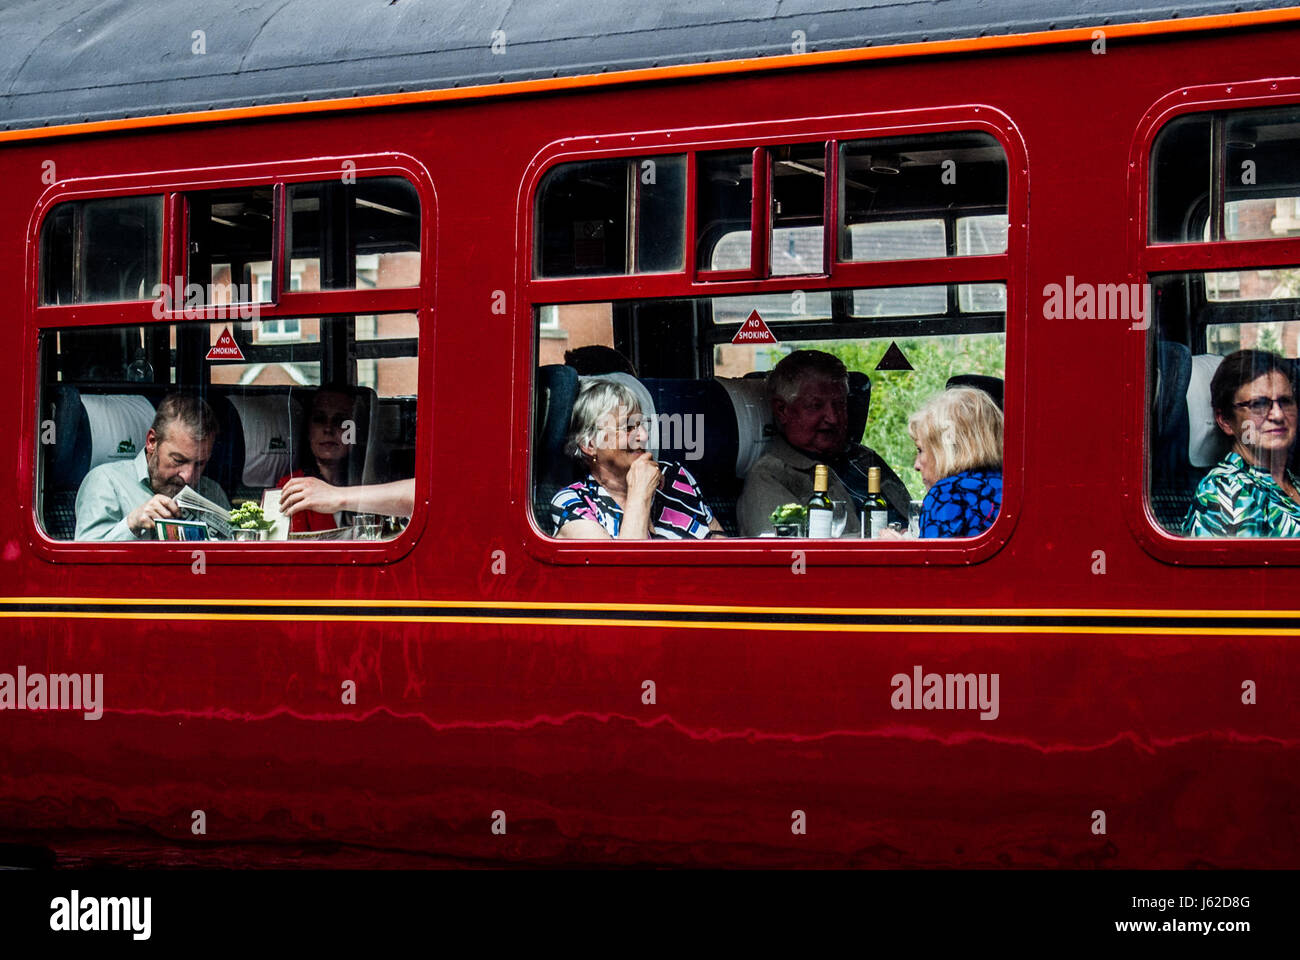 Hereford, Herefordshire. 19th May 2017. Passengers seen on board the Flying Scotsman as crowds gather to see Pacific steam locomotive LNER Class A3 4472 commonly known as the Flying Scotsman at Hereford railway station as it travels from Shrewsbury to Cardiff and then Newport to Bristol Parkway via Gloucester. The 94 year old Flying Scotsman was originally built in Doncaster for the London and North Eastern Railway (LNER), emerging from the works on 24 February 1923. Credit: Jim Wood/Alamy Live News Stock Photo